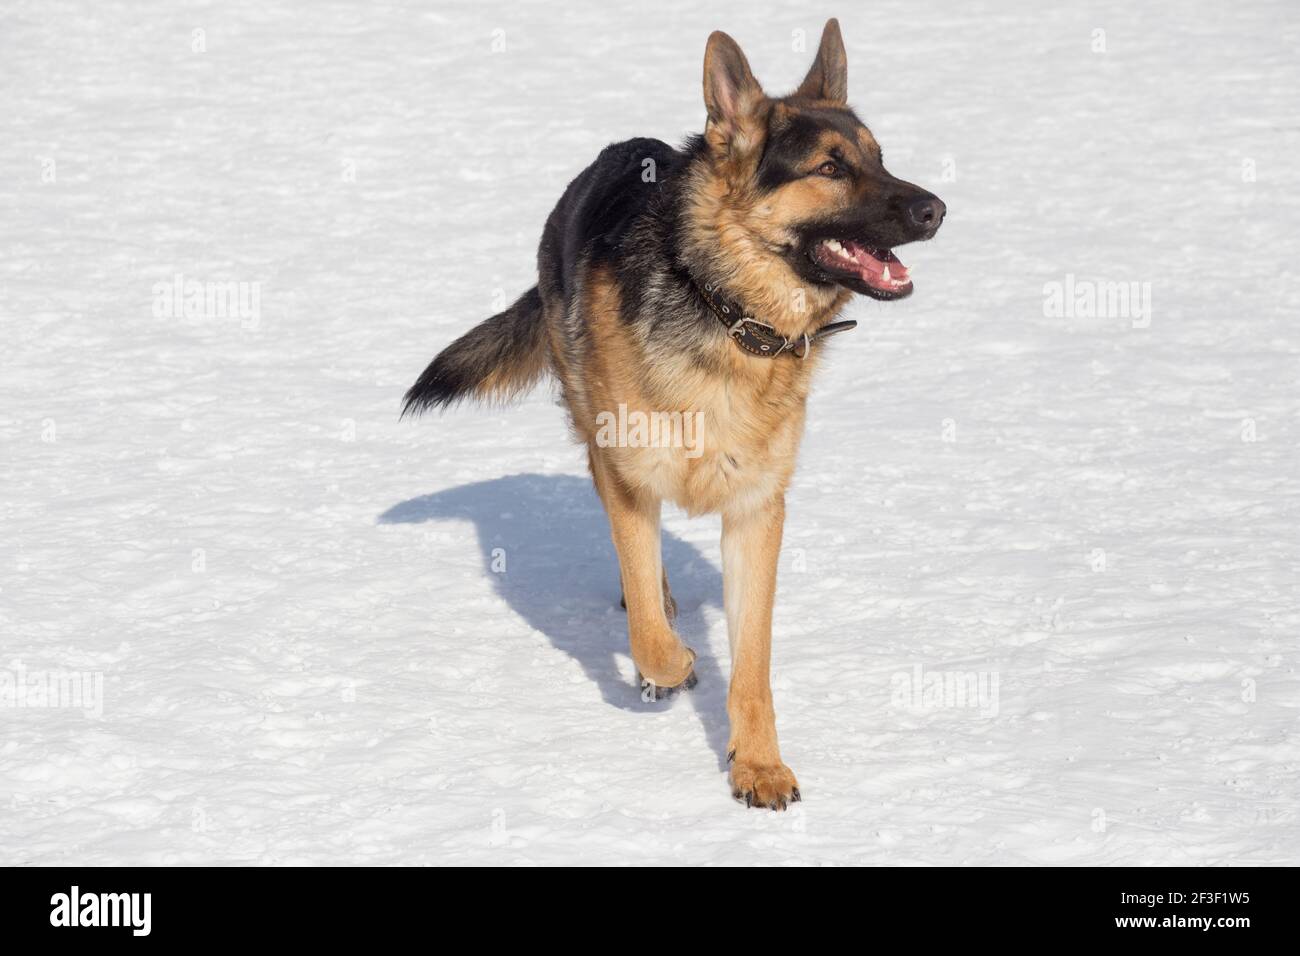 Cute german shepherd dog puppy is walking on white snow in the winter park. Pet animals. Purebred dog. Stock Photo